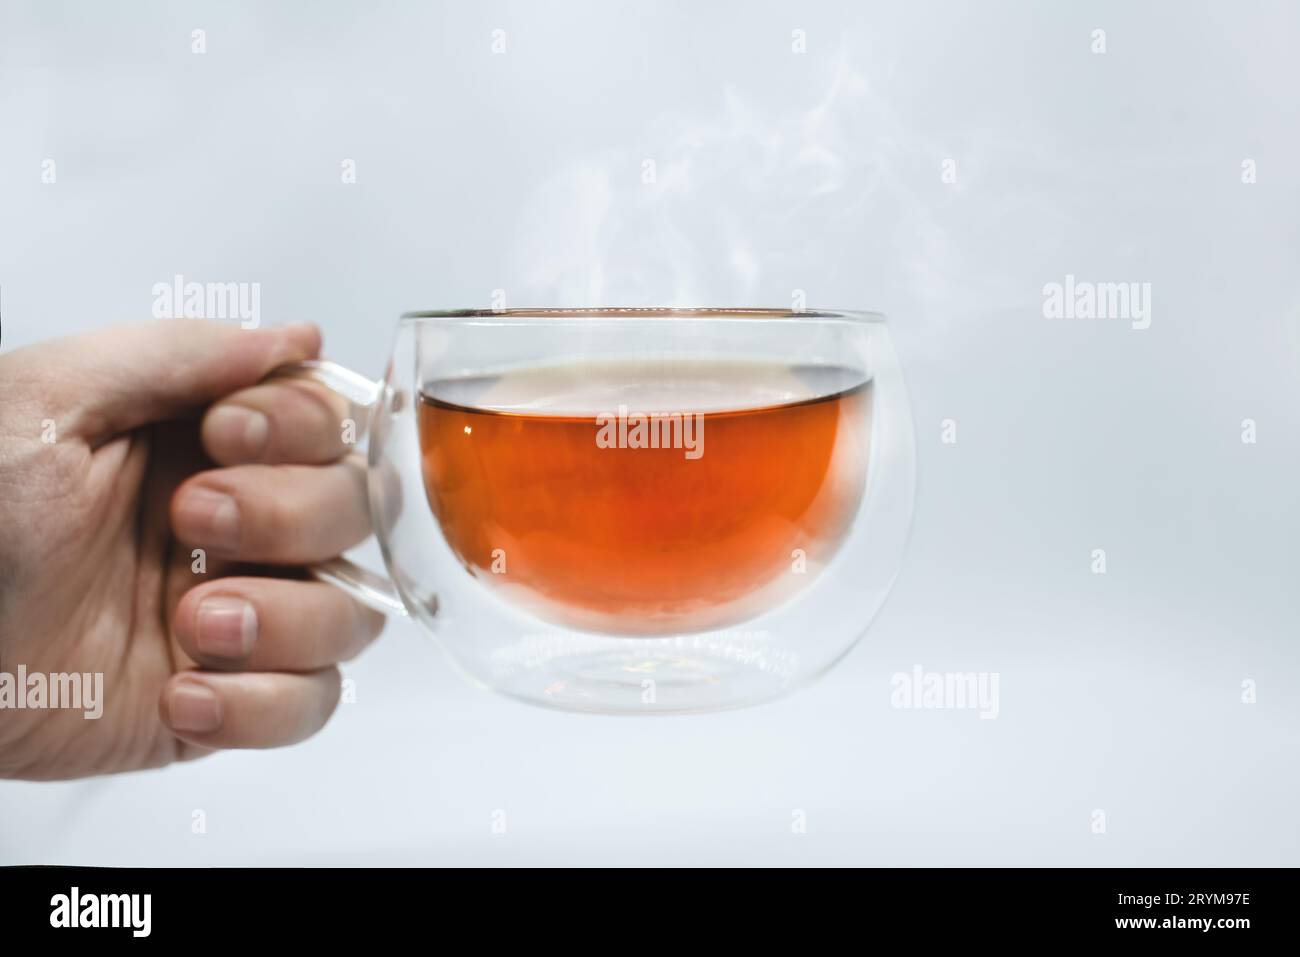 Man's hand holding a transparent cup with tea. Isolated on white background. Alpha Stock Photo